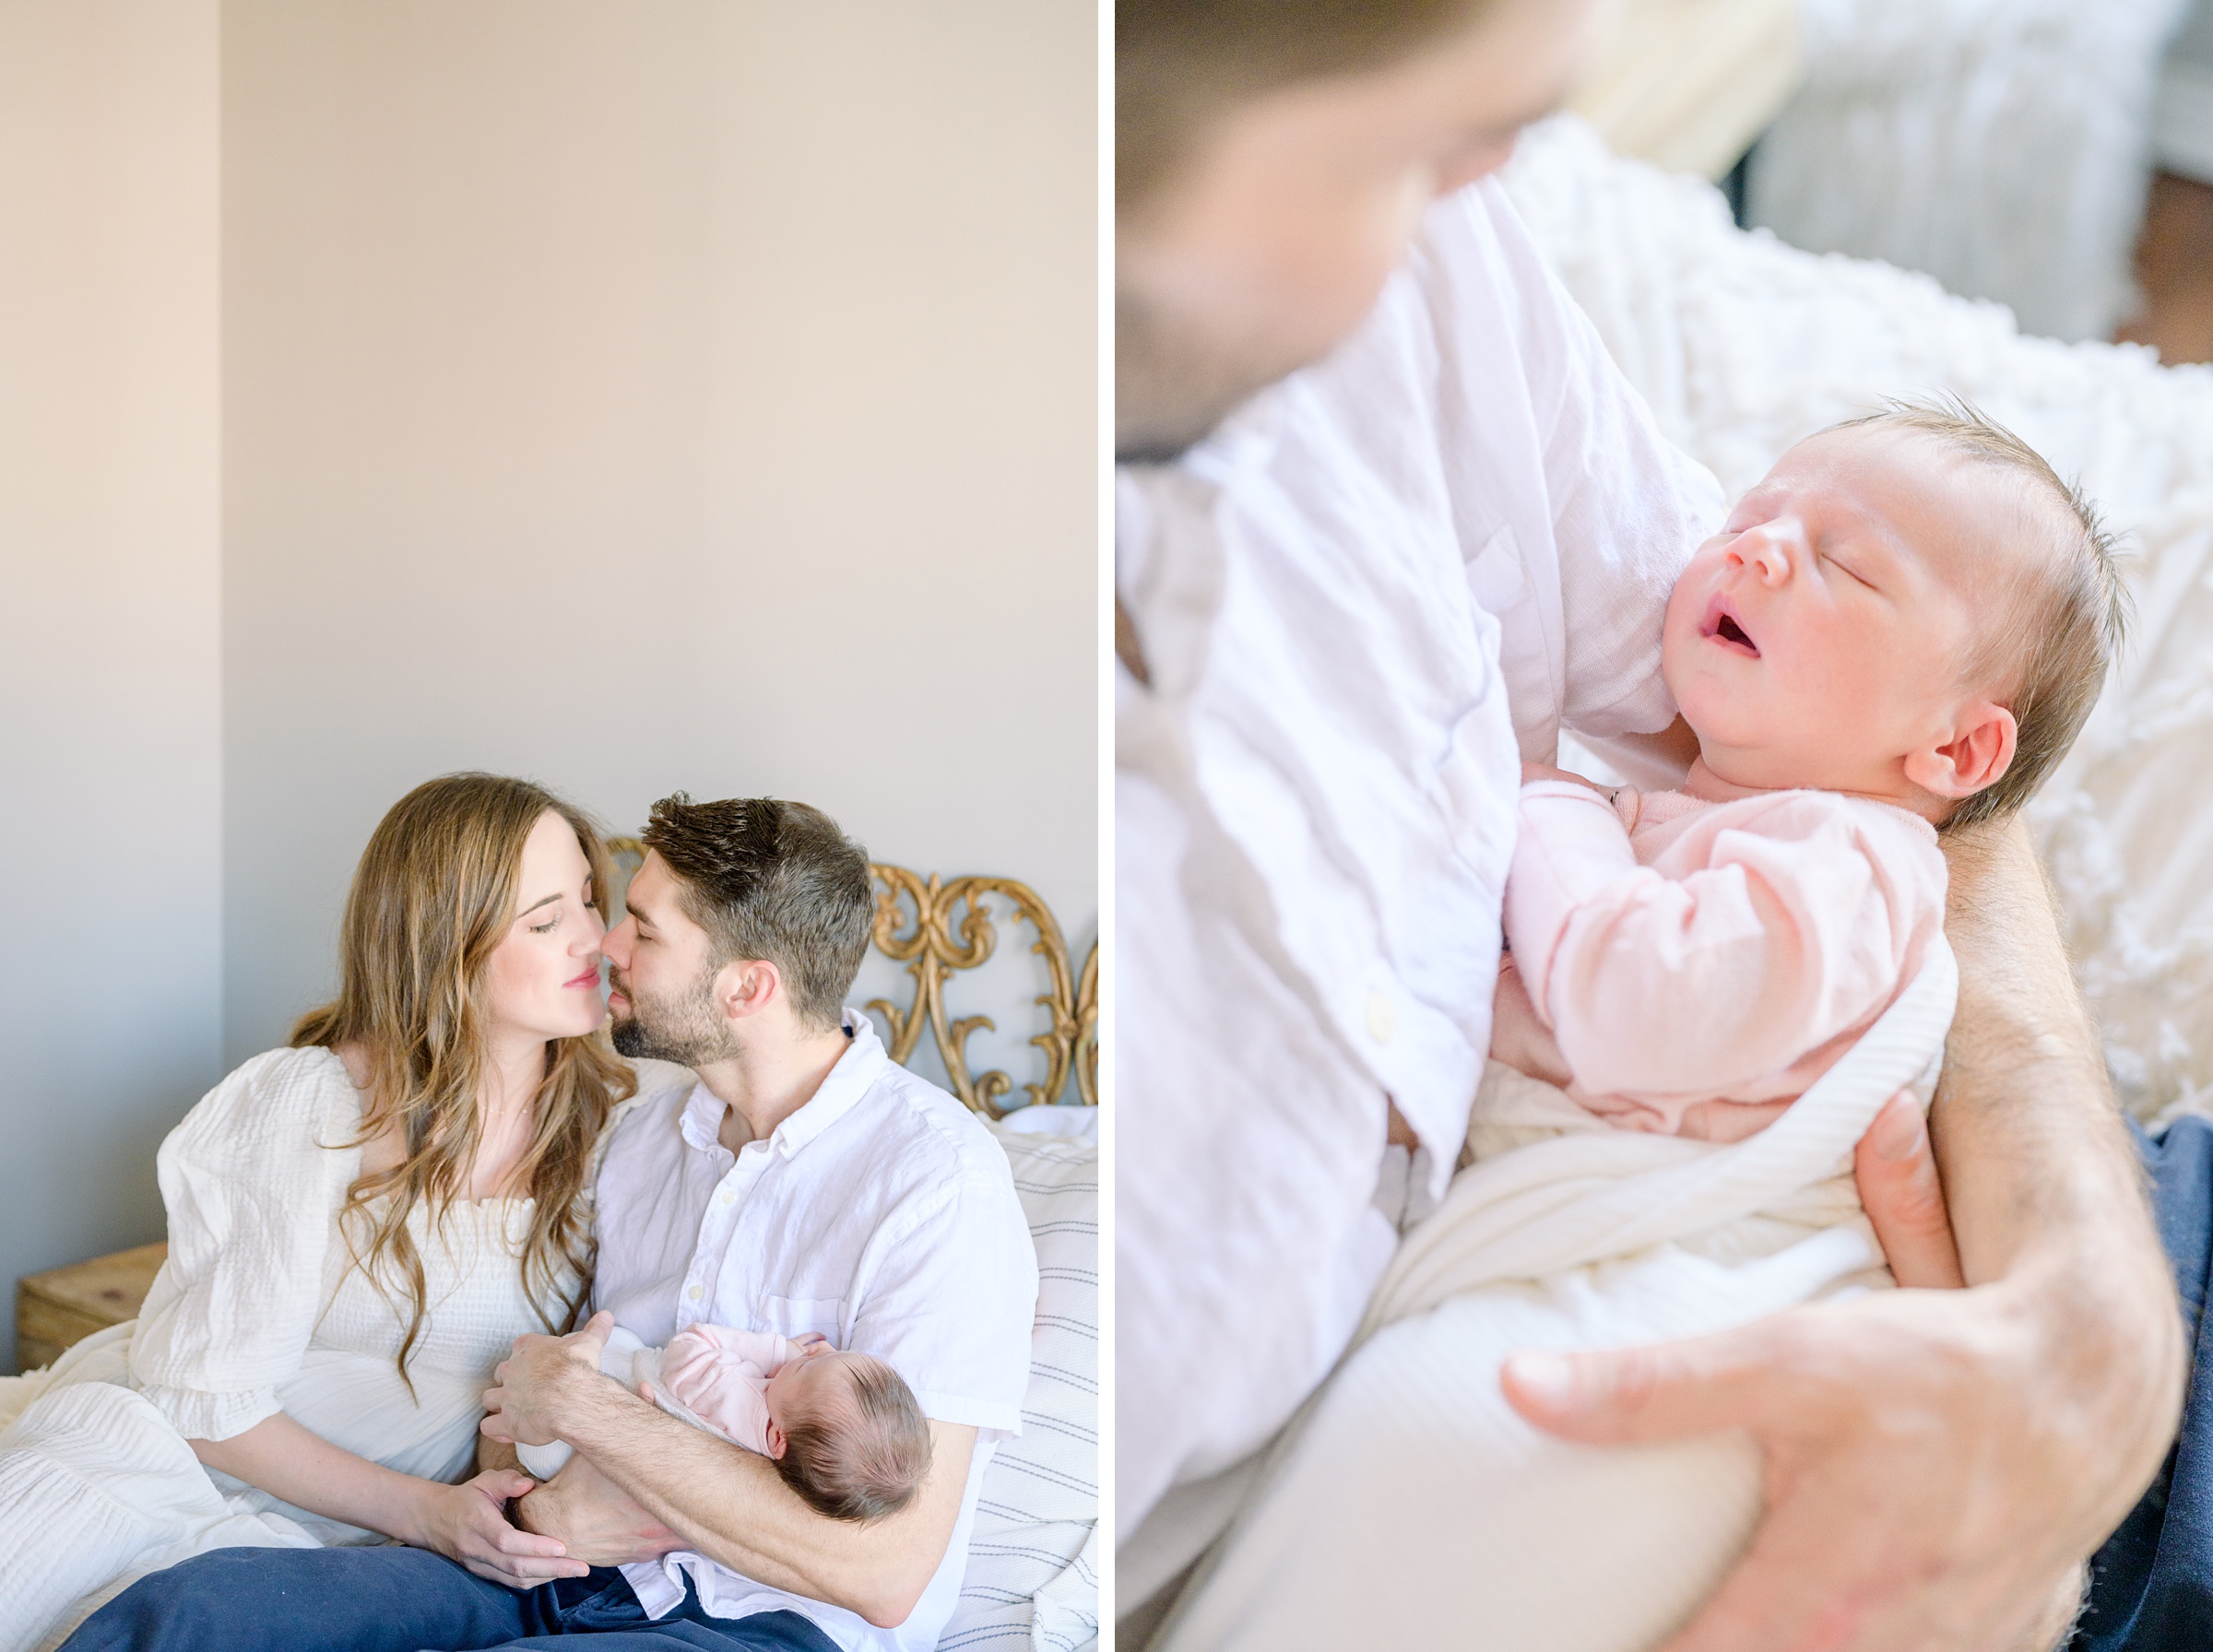 Newborn photos at an in-home lifestyle newborn session in Baltimore, Maryland photographed by Baltimore Maternity Photographer Cait Kramer.